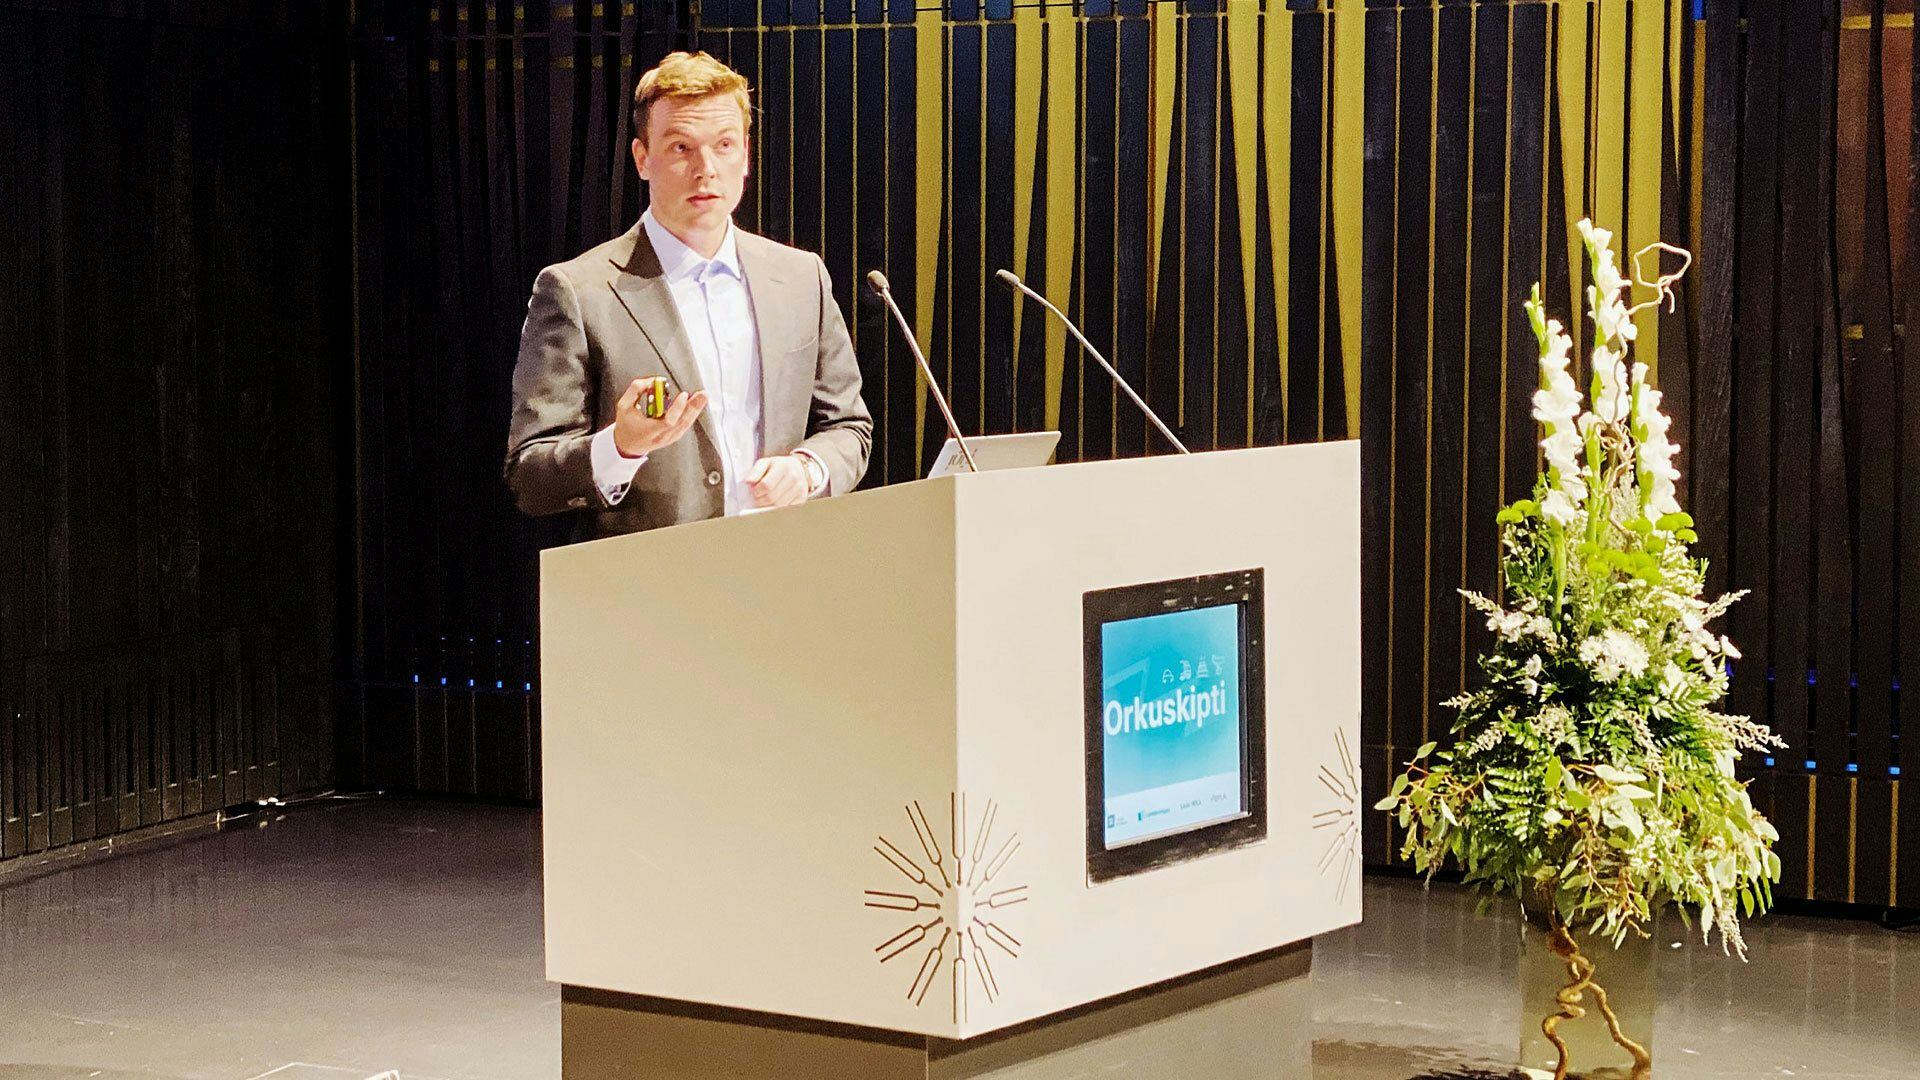 A man giving speech at a podium labelled "orkuskipti" with digital display next to floral arrangement